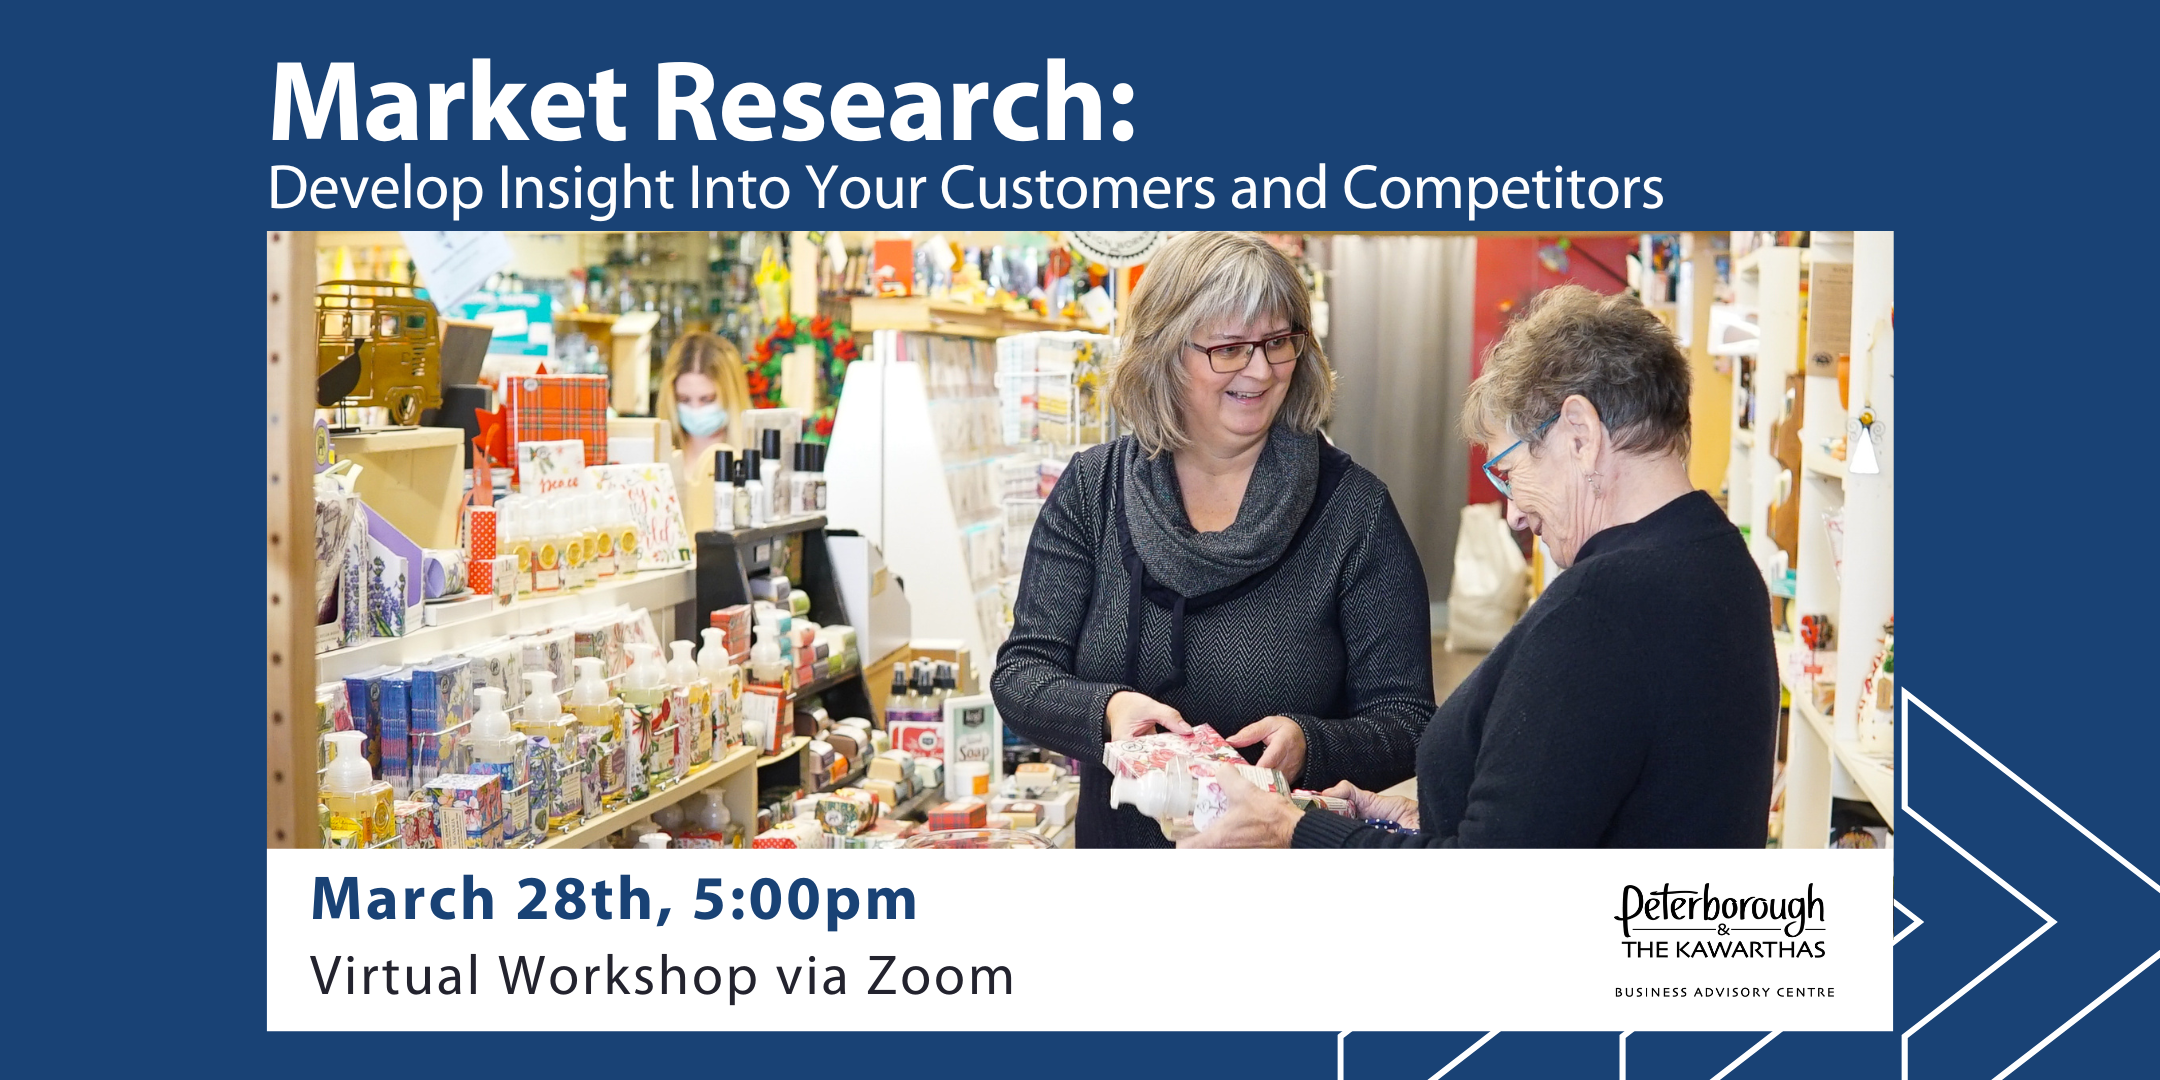 Market Research Webinar: March 28, 5:00pm virtual on Zoom